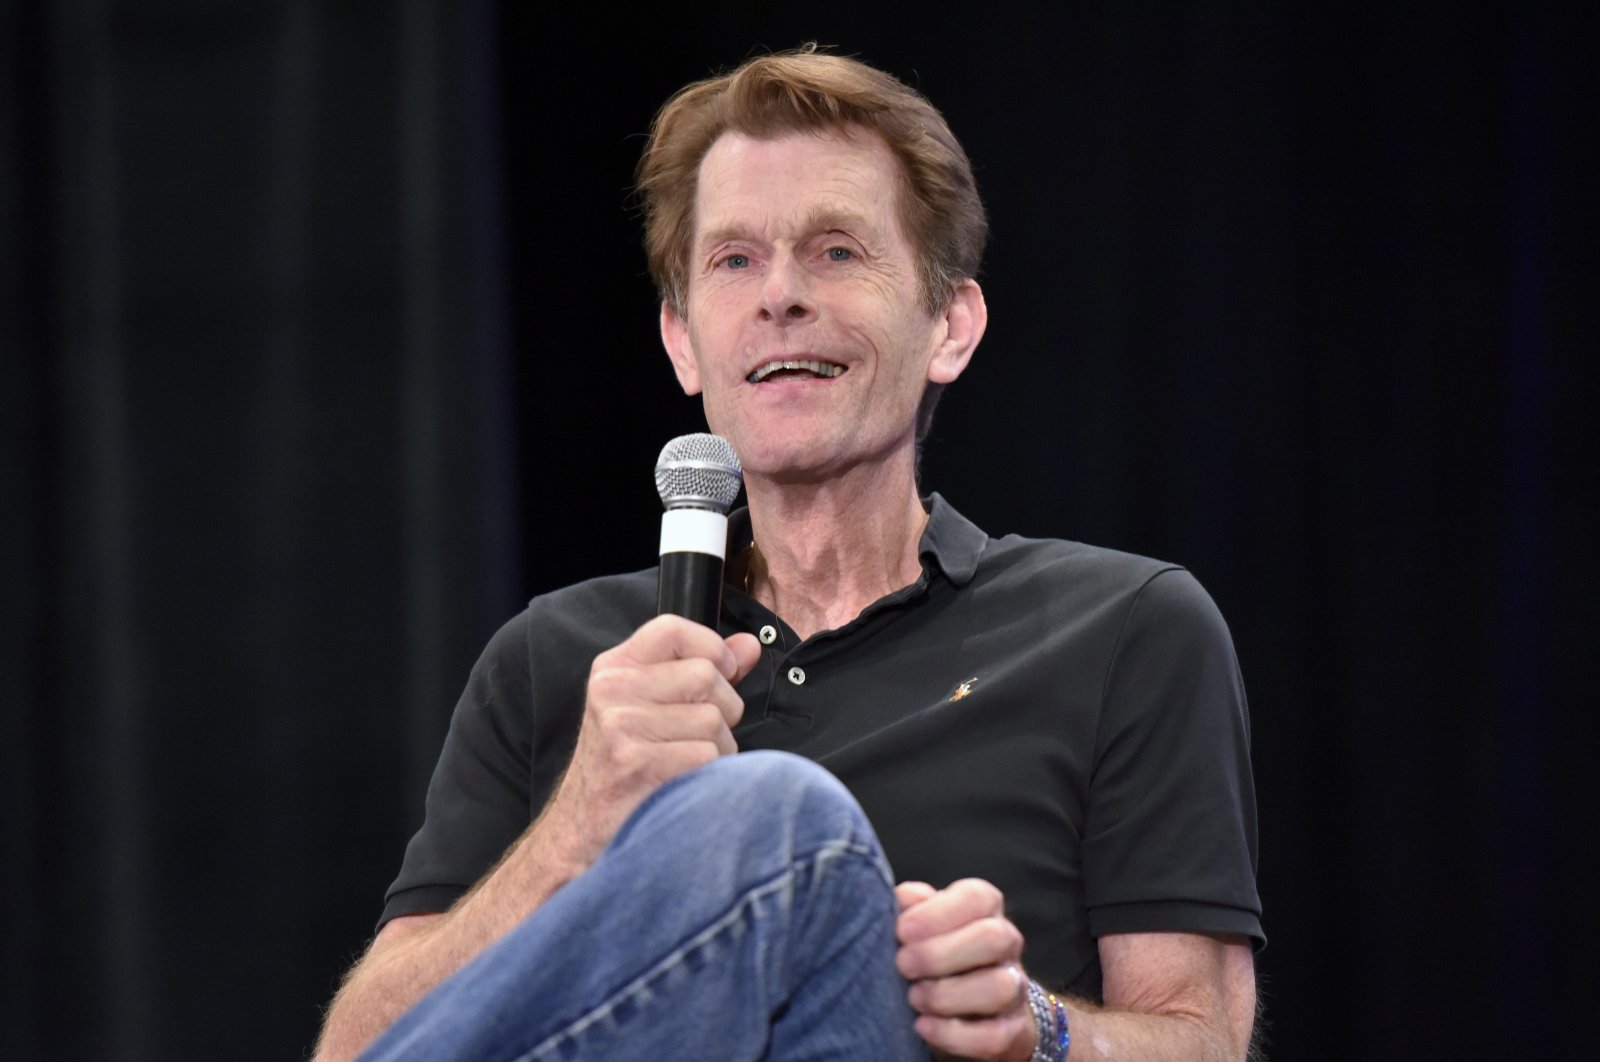 Kevin Conroy participates during a Q&amp;A panel at Wizard World, in Chicago, U.S., Aug. 24, 2019. (AP Photo)